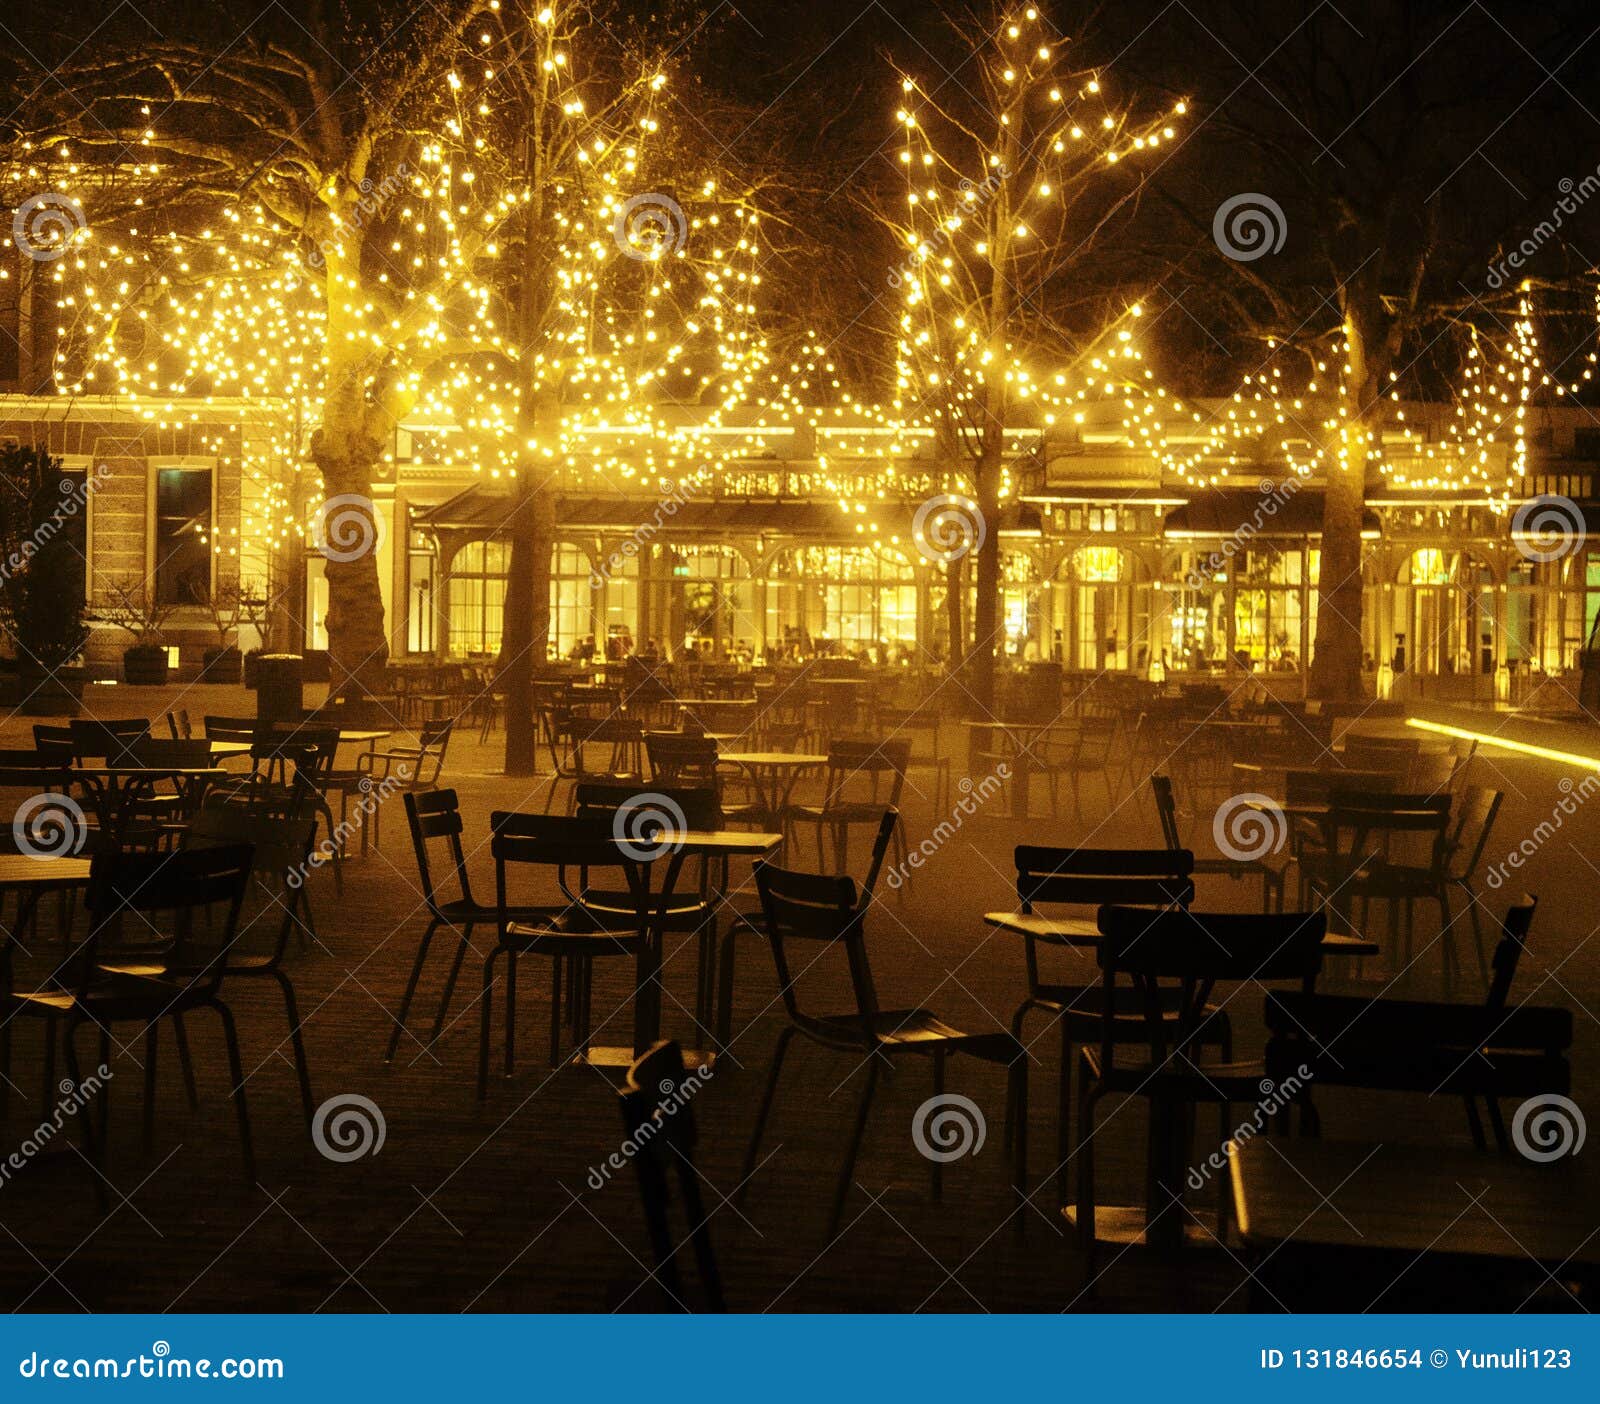 empty night restaurant, lot of tables and chairs with noone, mag